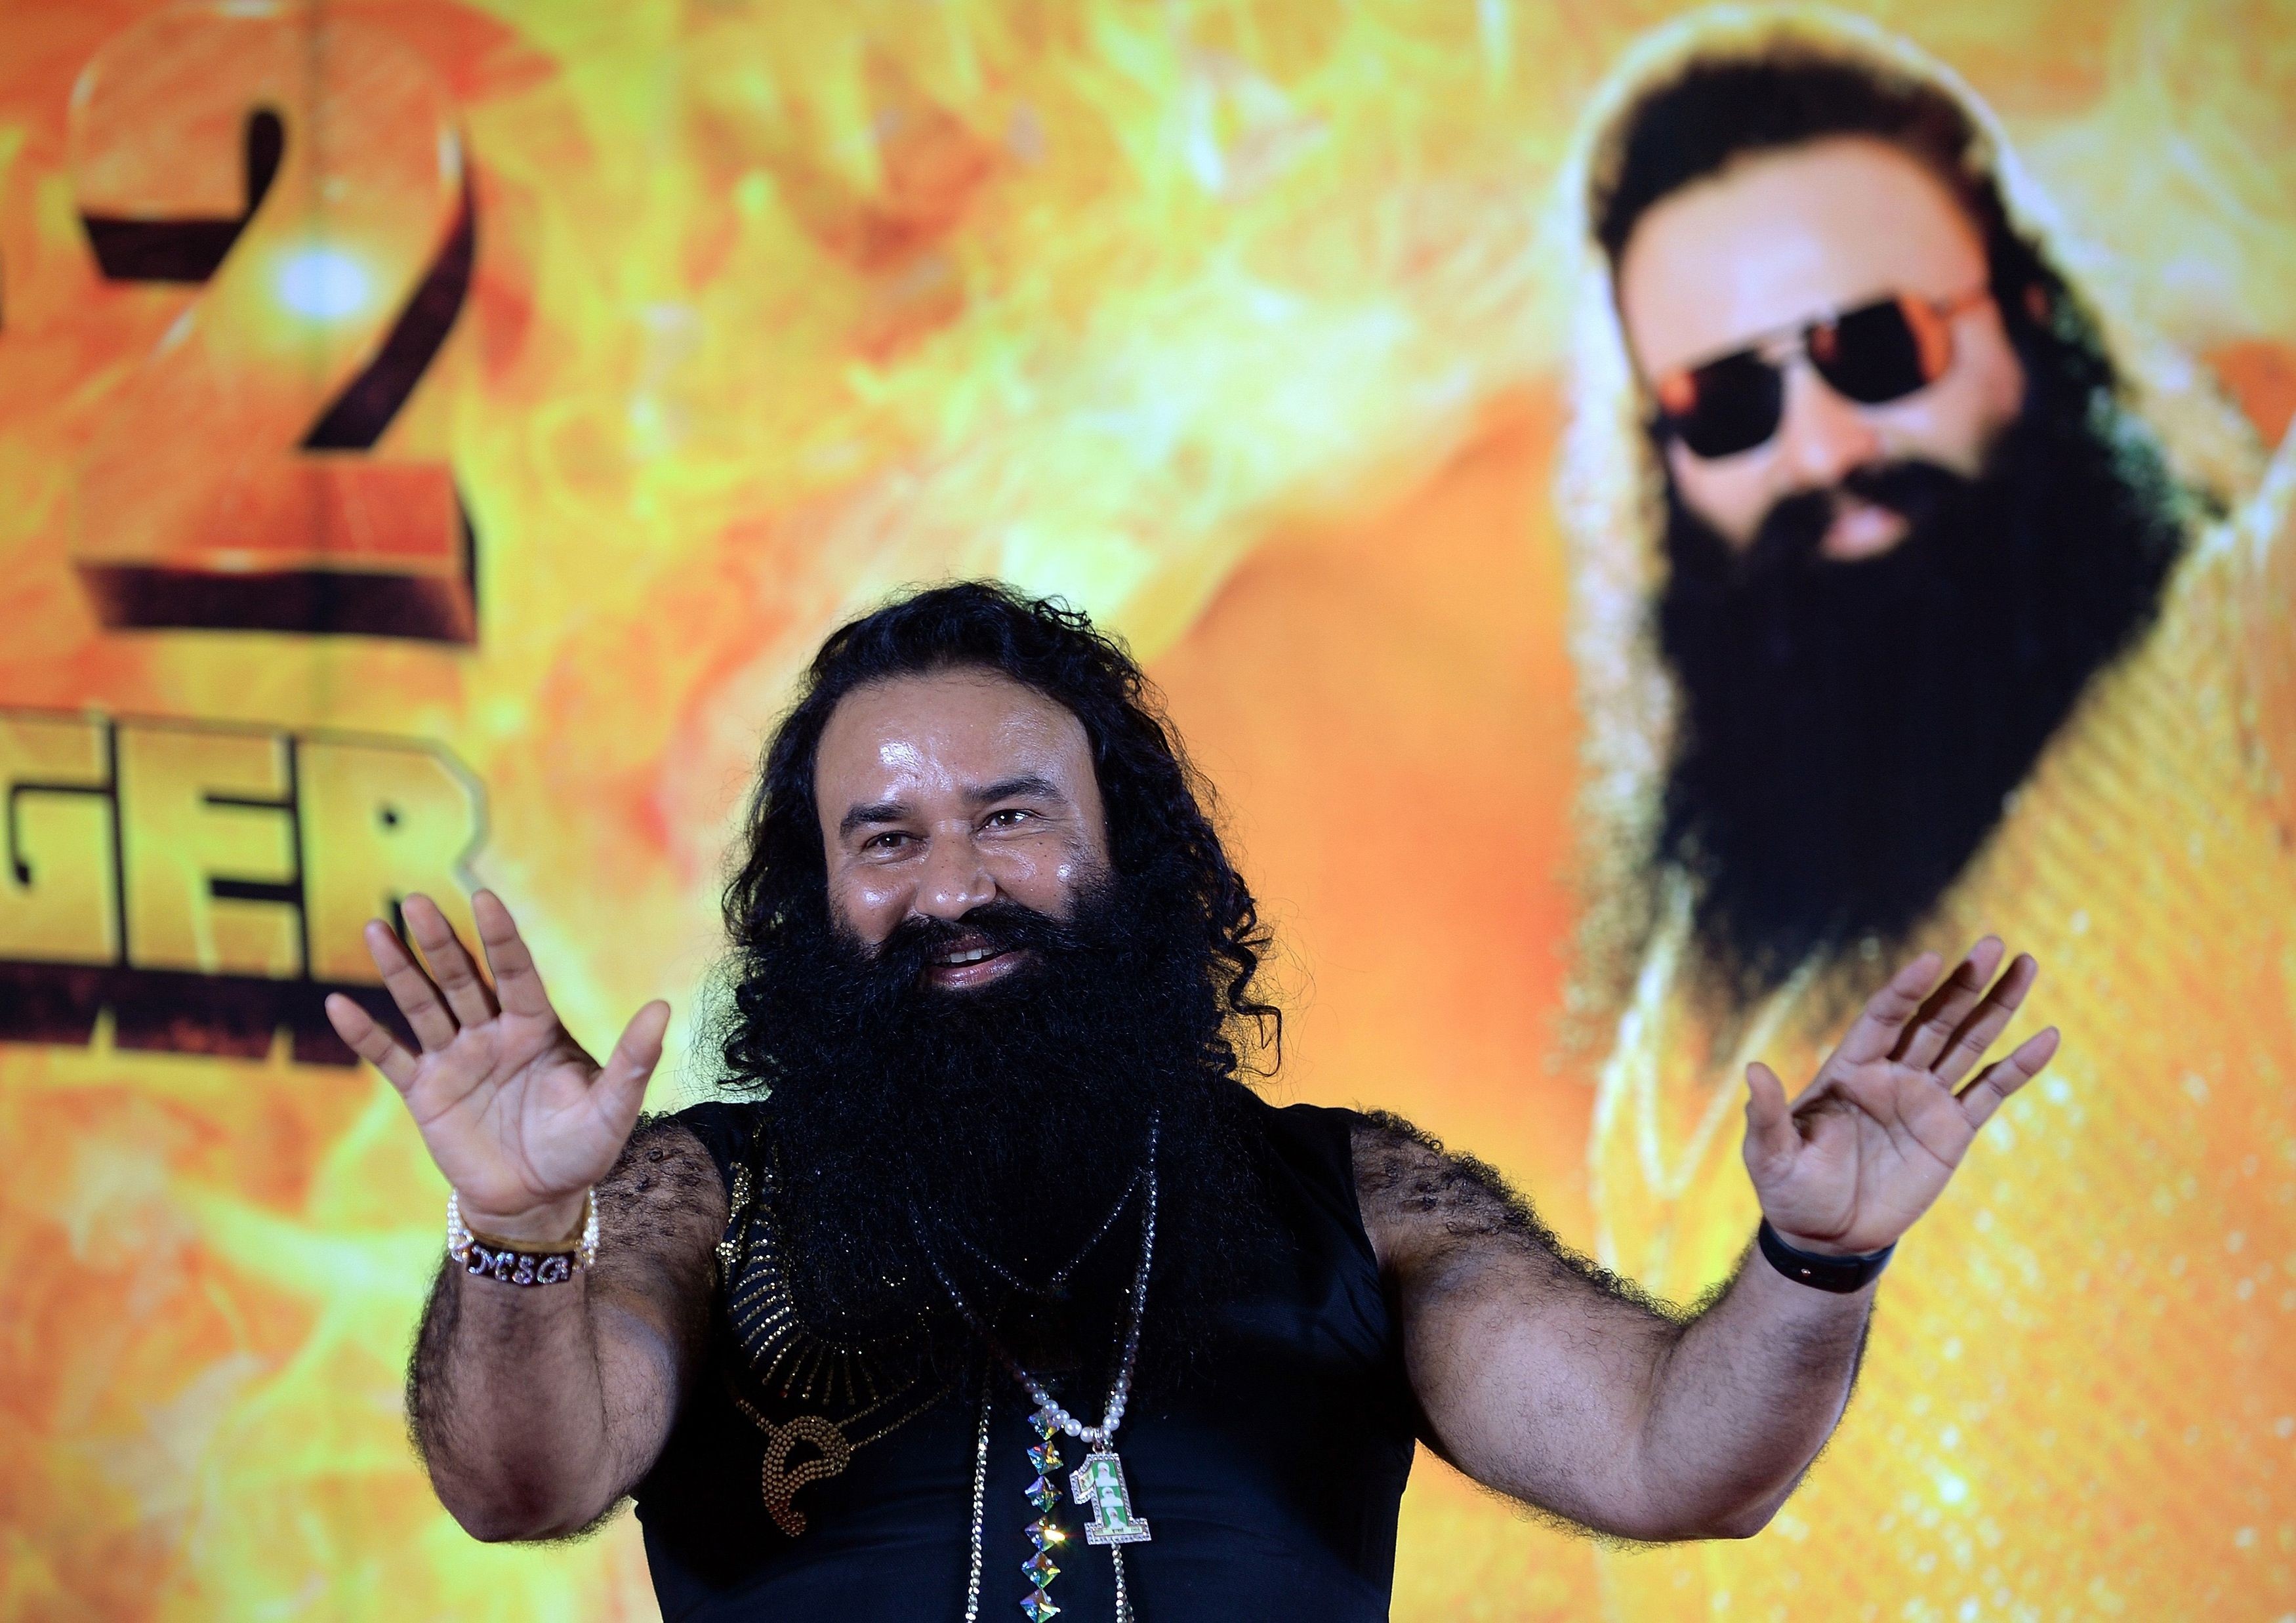 India’s godmen make billions, sway political fortunes, and hold entire cities to ransom – as the aftermath of Ram Rahim’s jailing shows. So what’s behind their unholy hold on the public imagination?